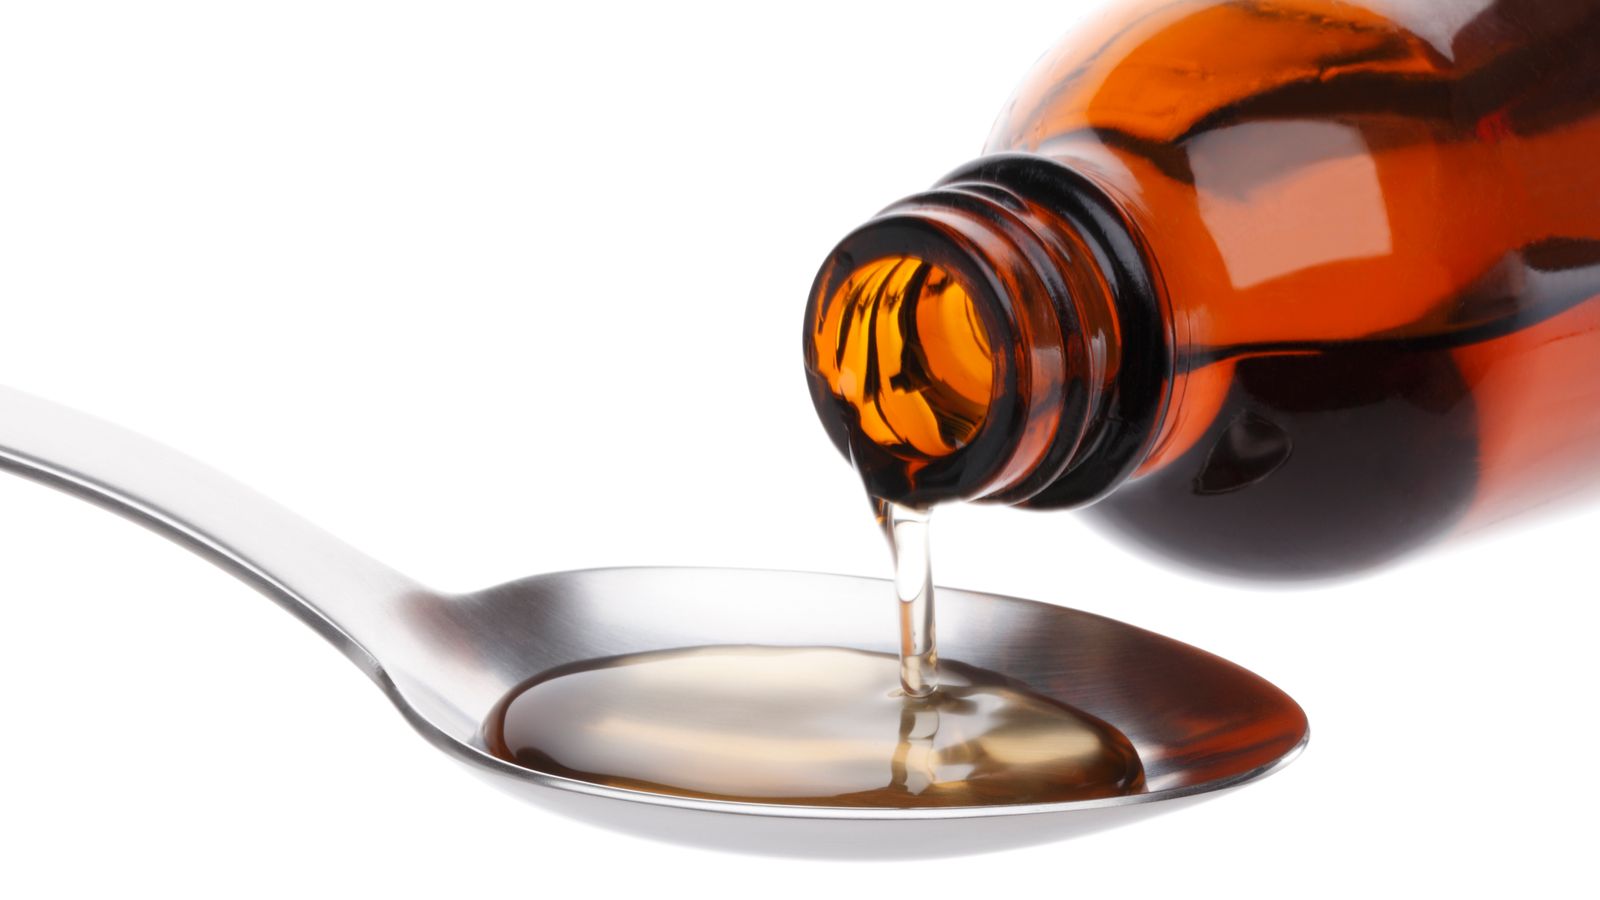 Some cough syrups could be made prescription-only over addiction fears